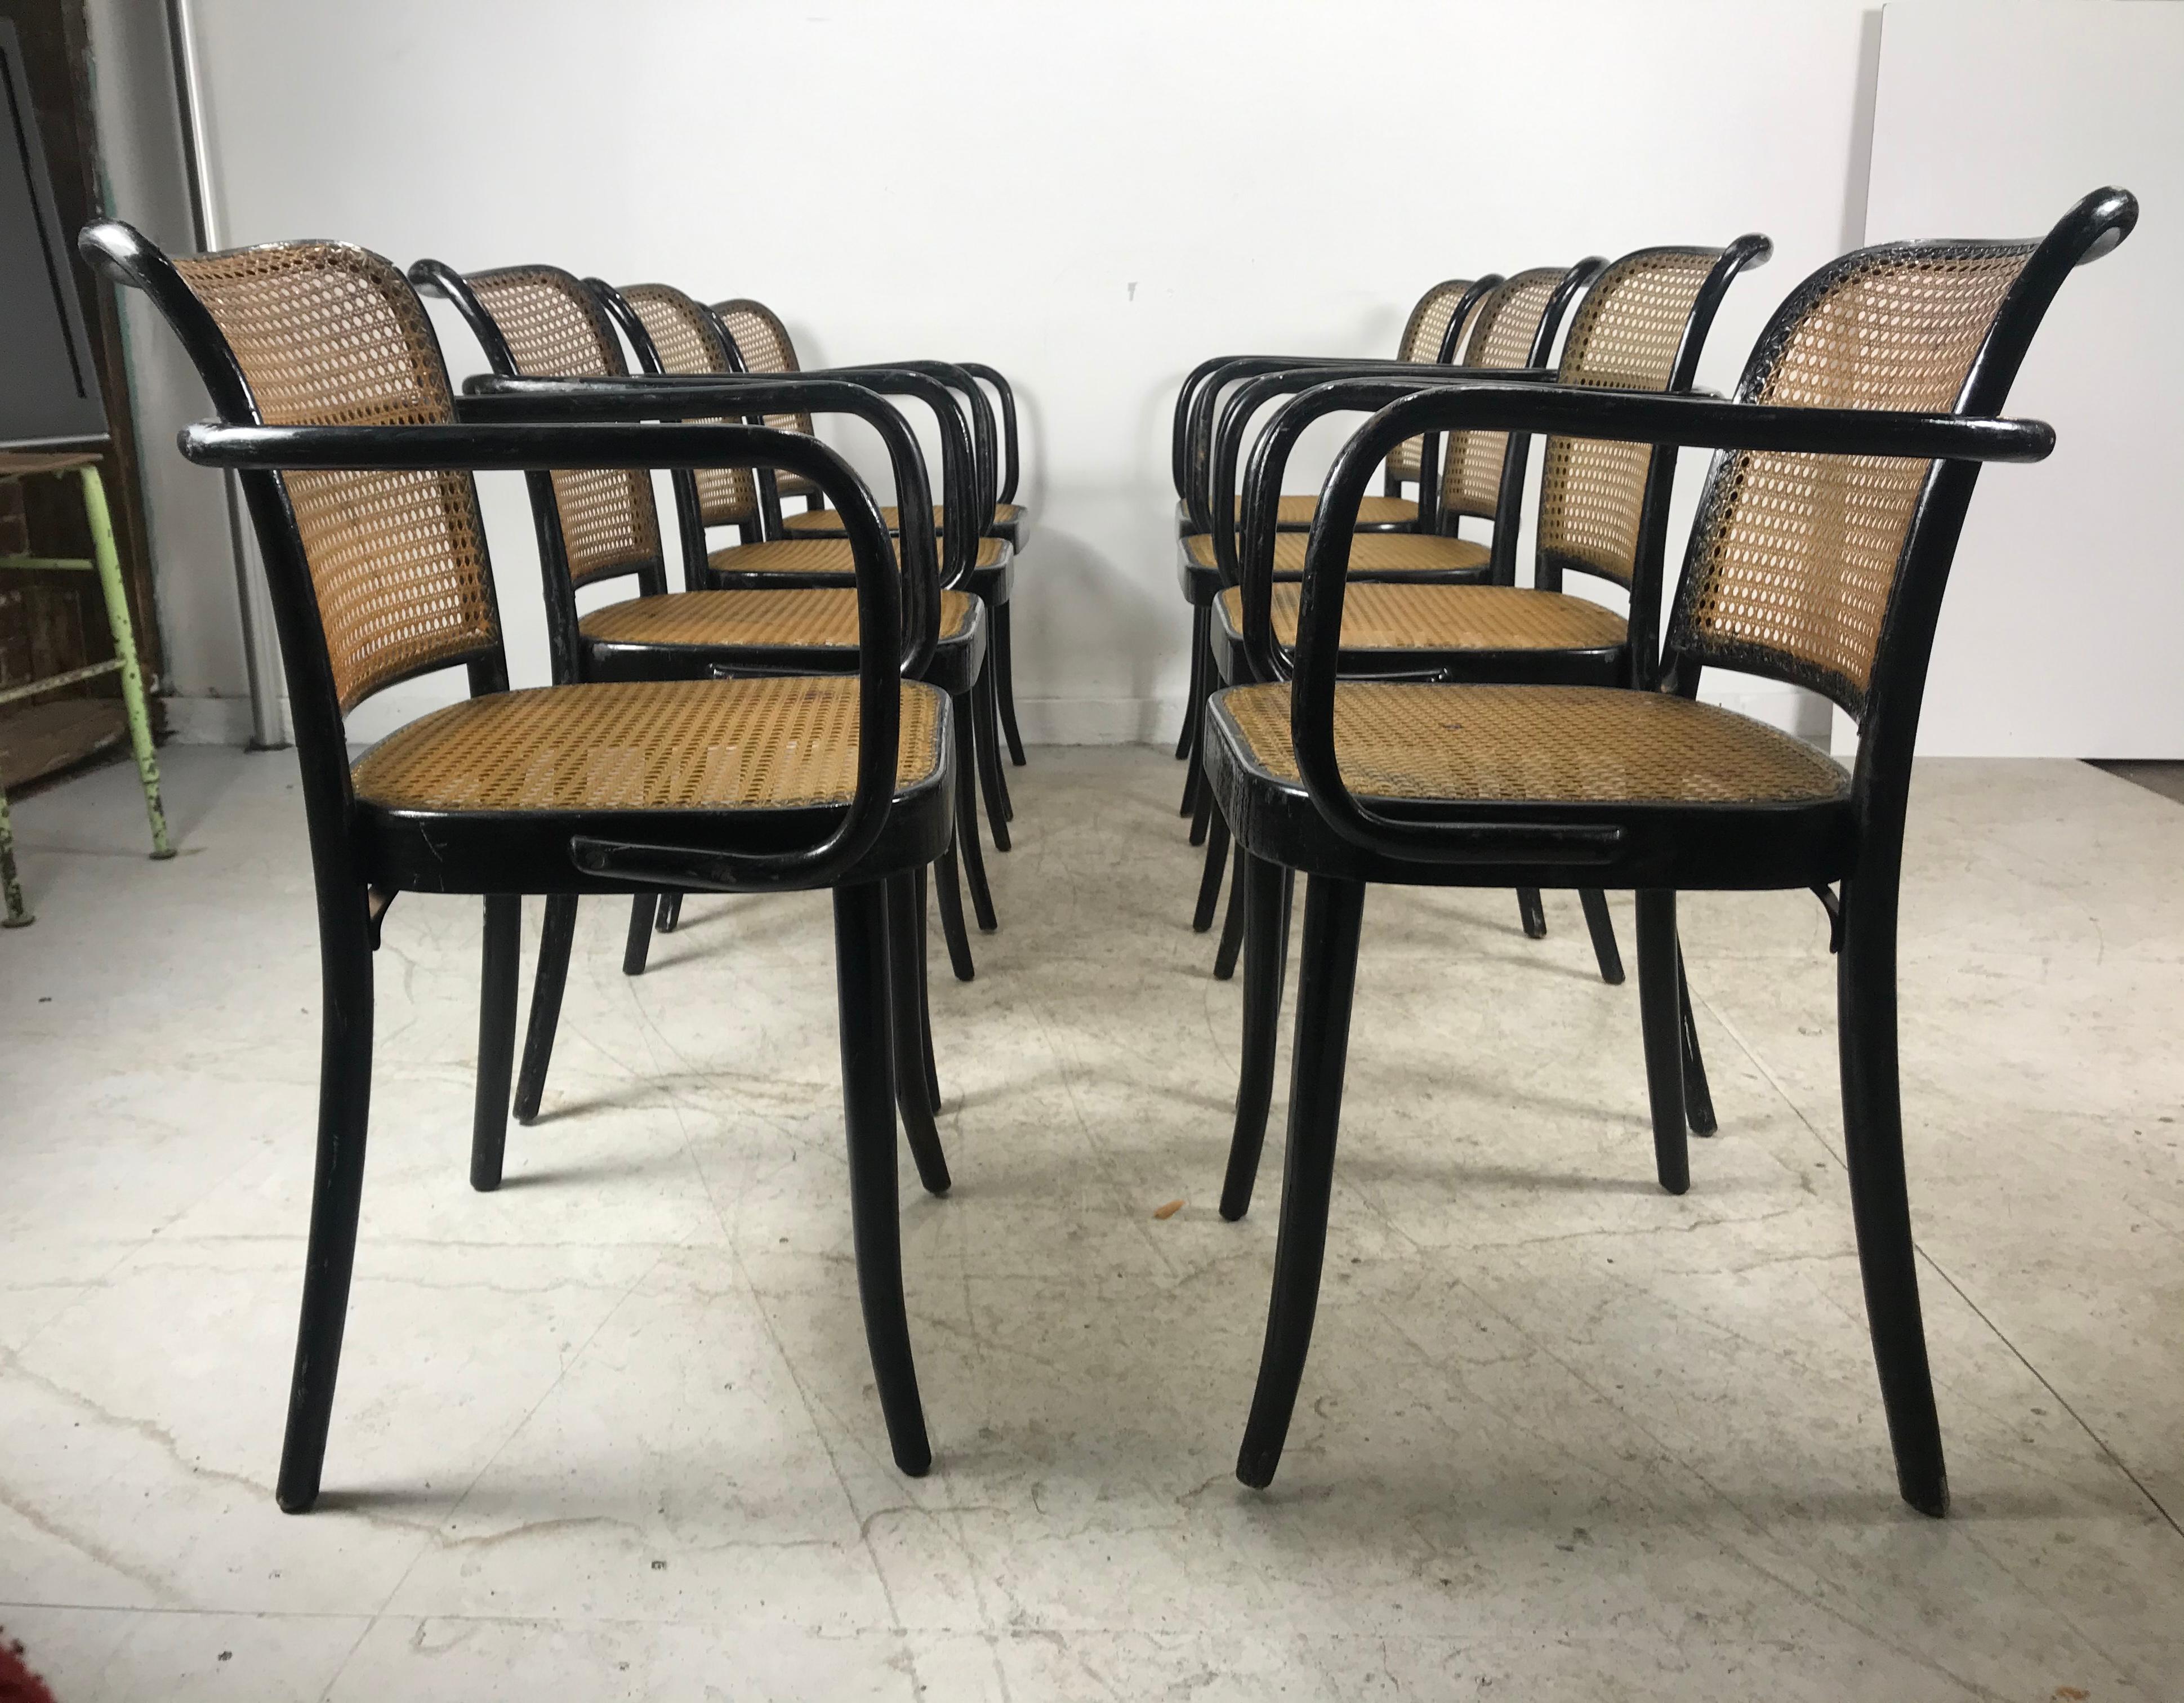 Classic set of eight, Stendig cane armchairs with bent black lacquered beech-wood frame and cane seat designed by to Josef Hoffmann. Made in Czechoslovakia. Few of the chairs retain original early Stendig label. Hand delivery avail to New York City